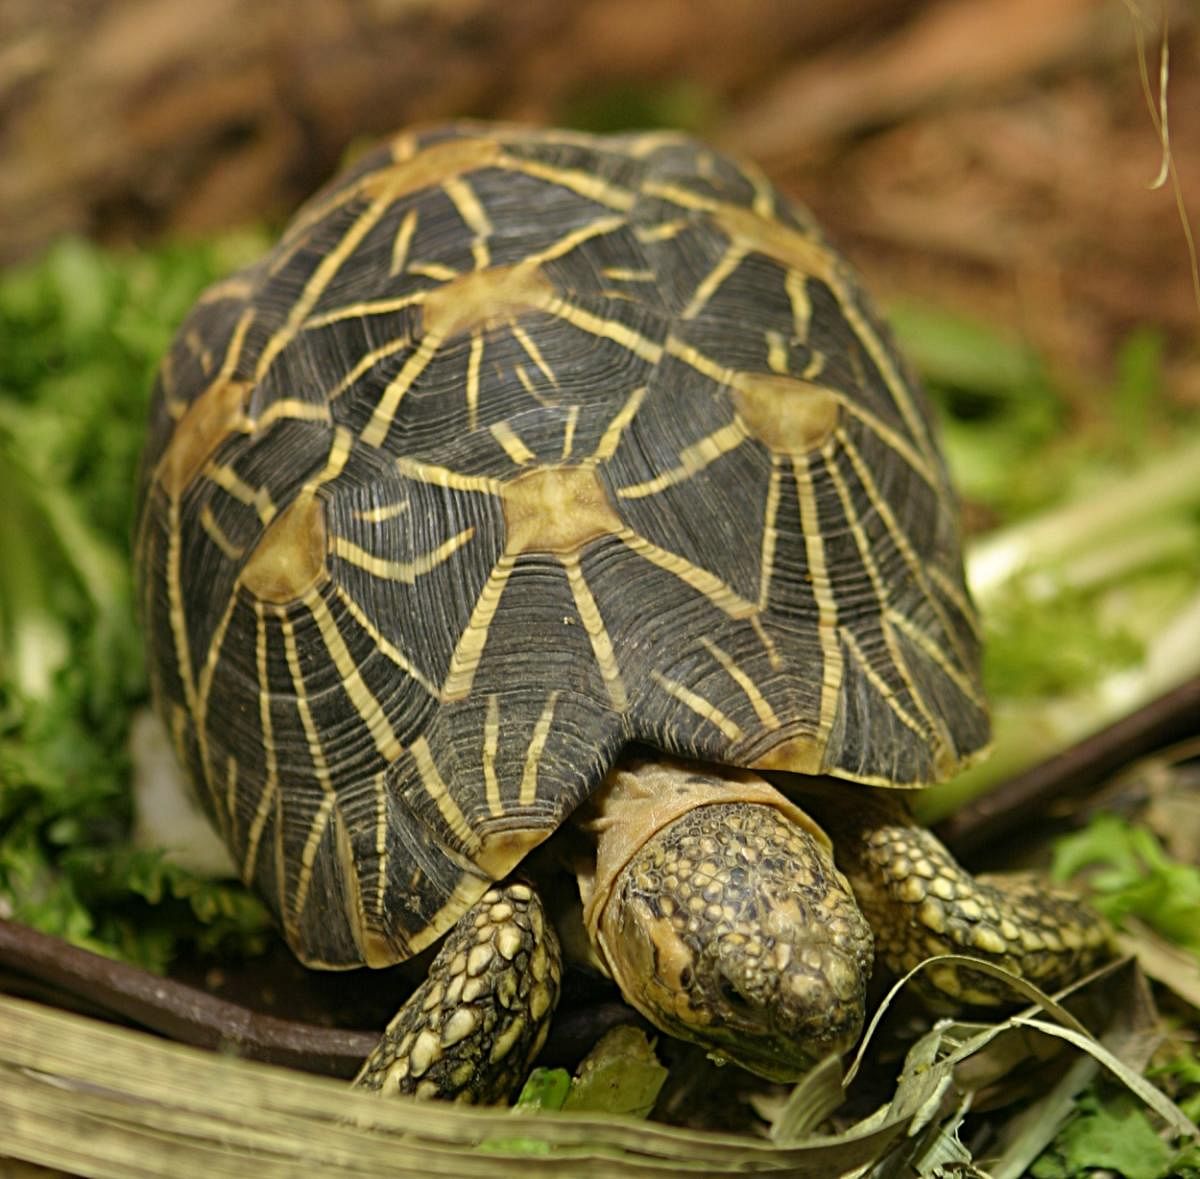 The Indian star tortoise is one of the most trafficked tortoise species in the world.